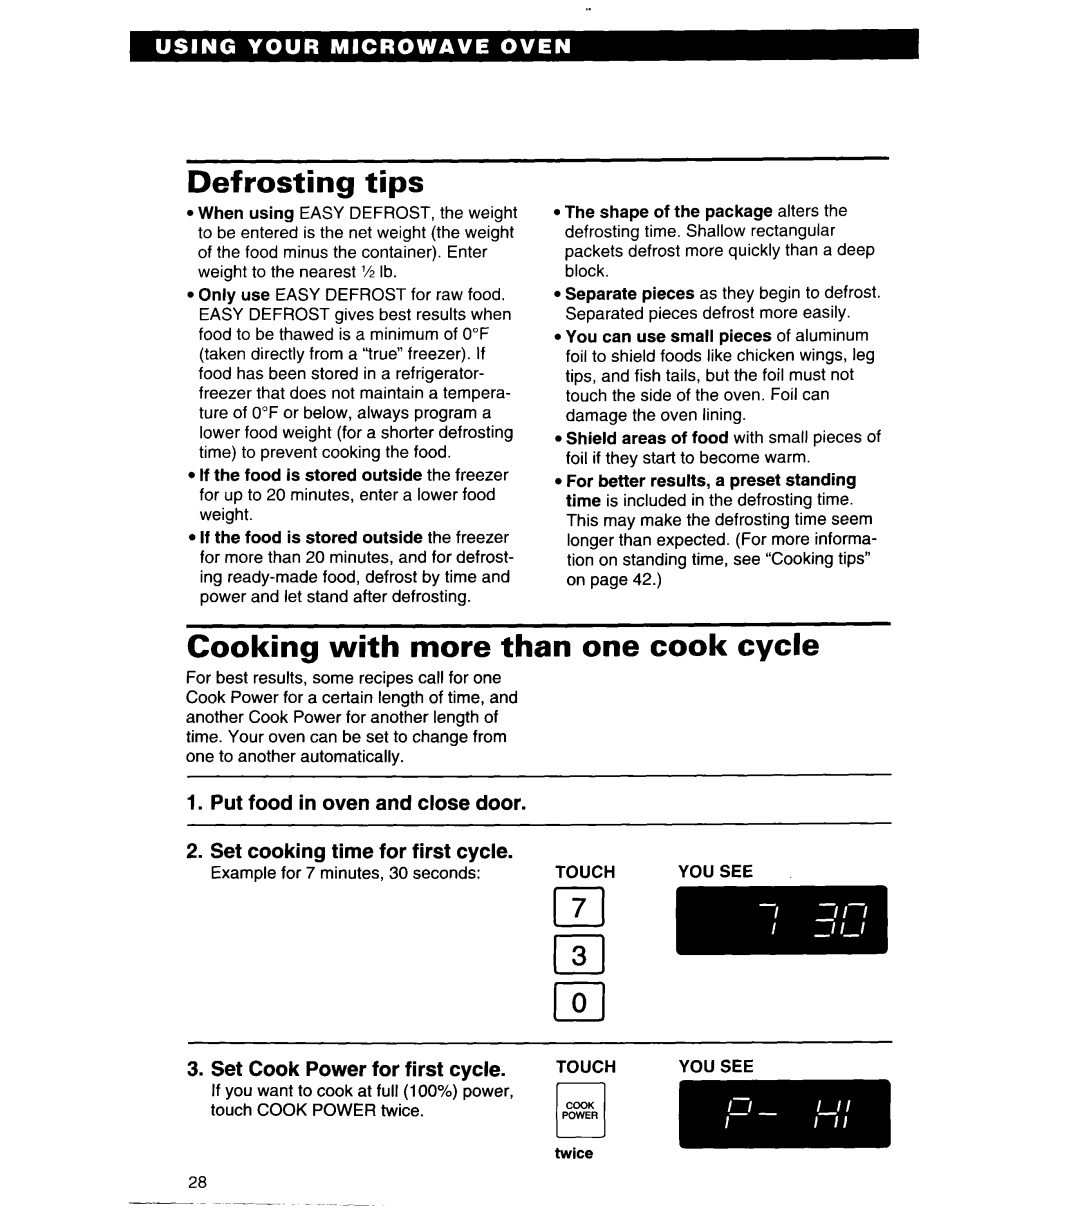 Whirlpool MT6125XBB/Q Defrosting tips, Cooking with more than one cook cycle, Set cooking time for first cycle 